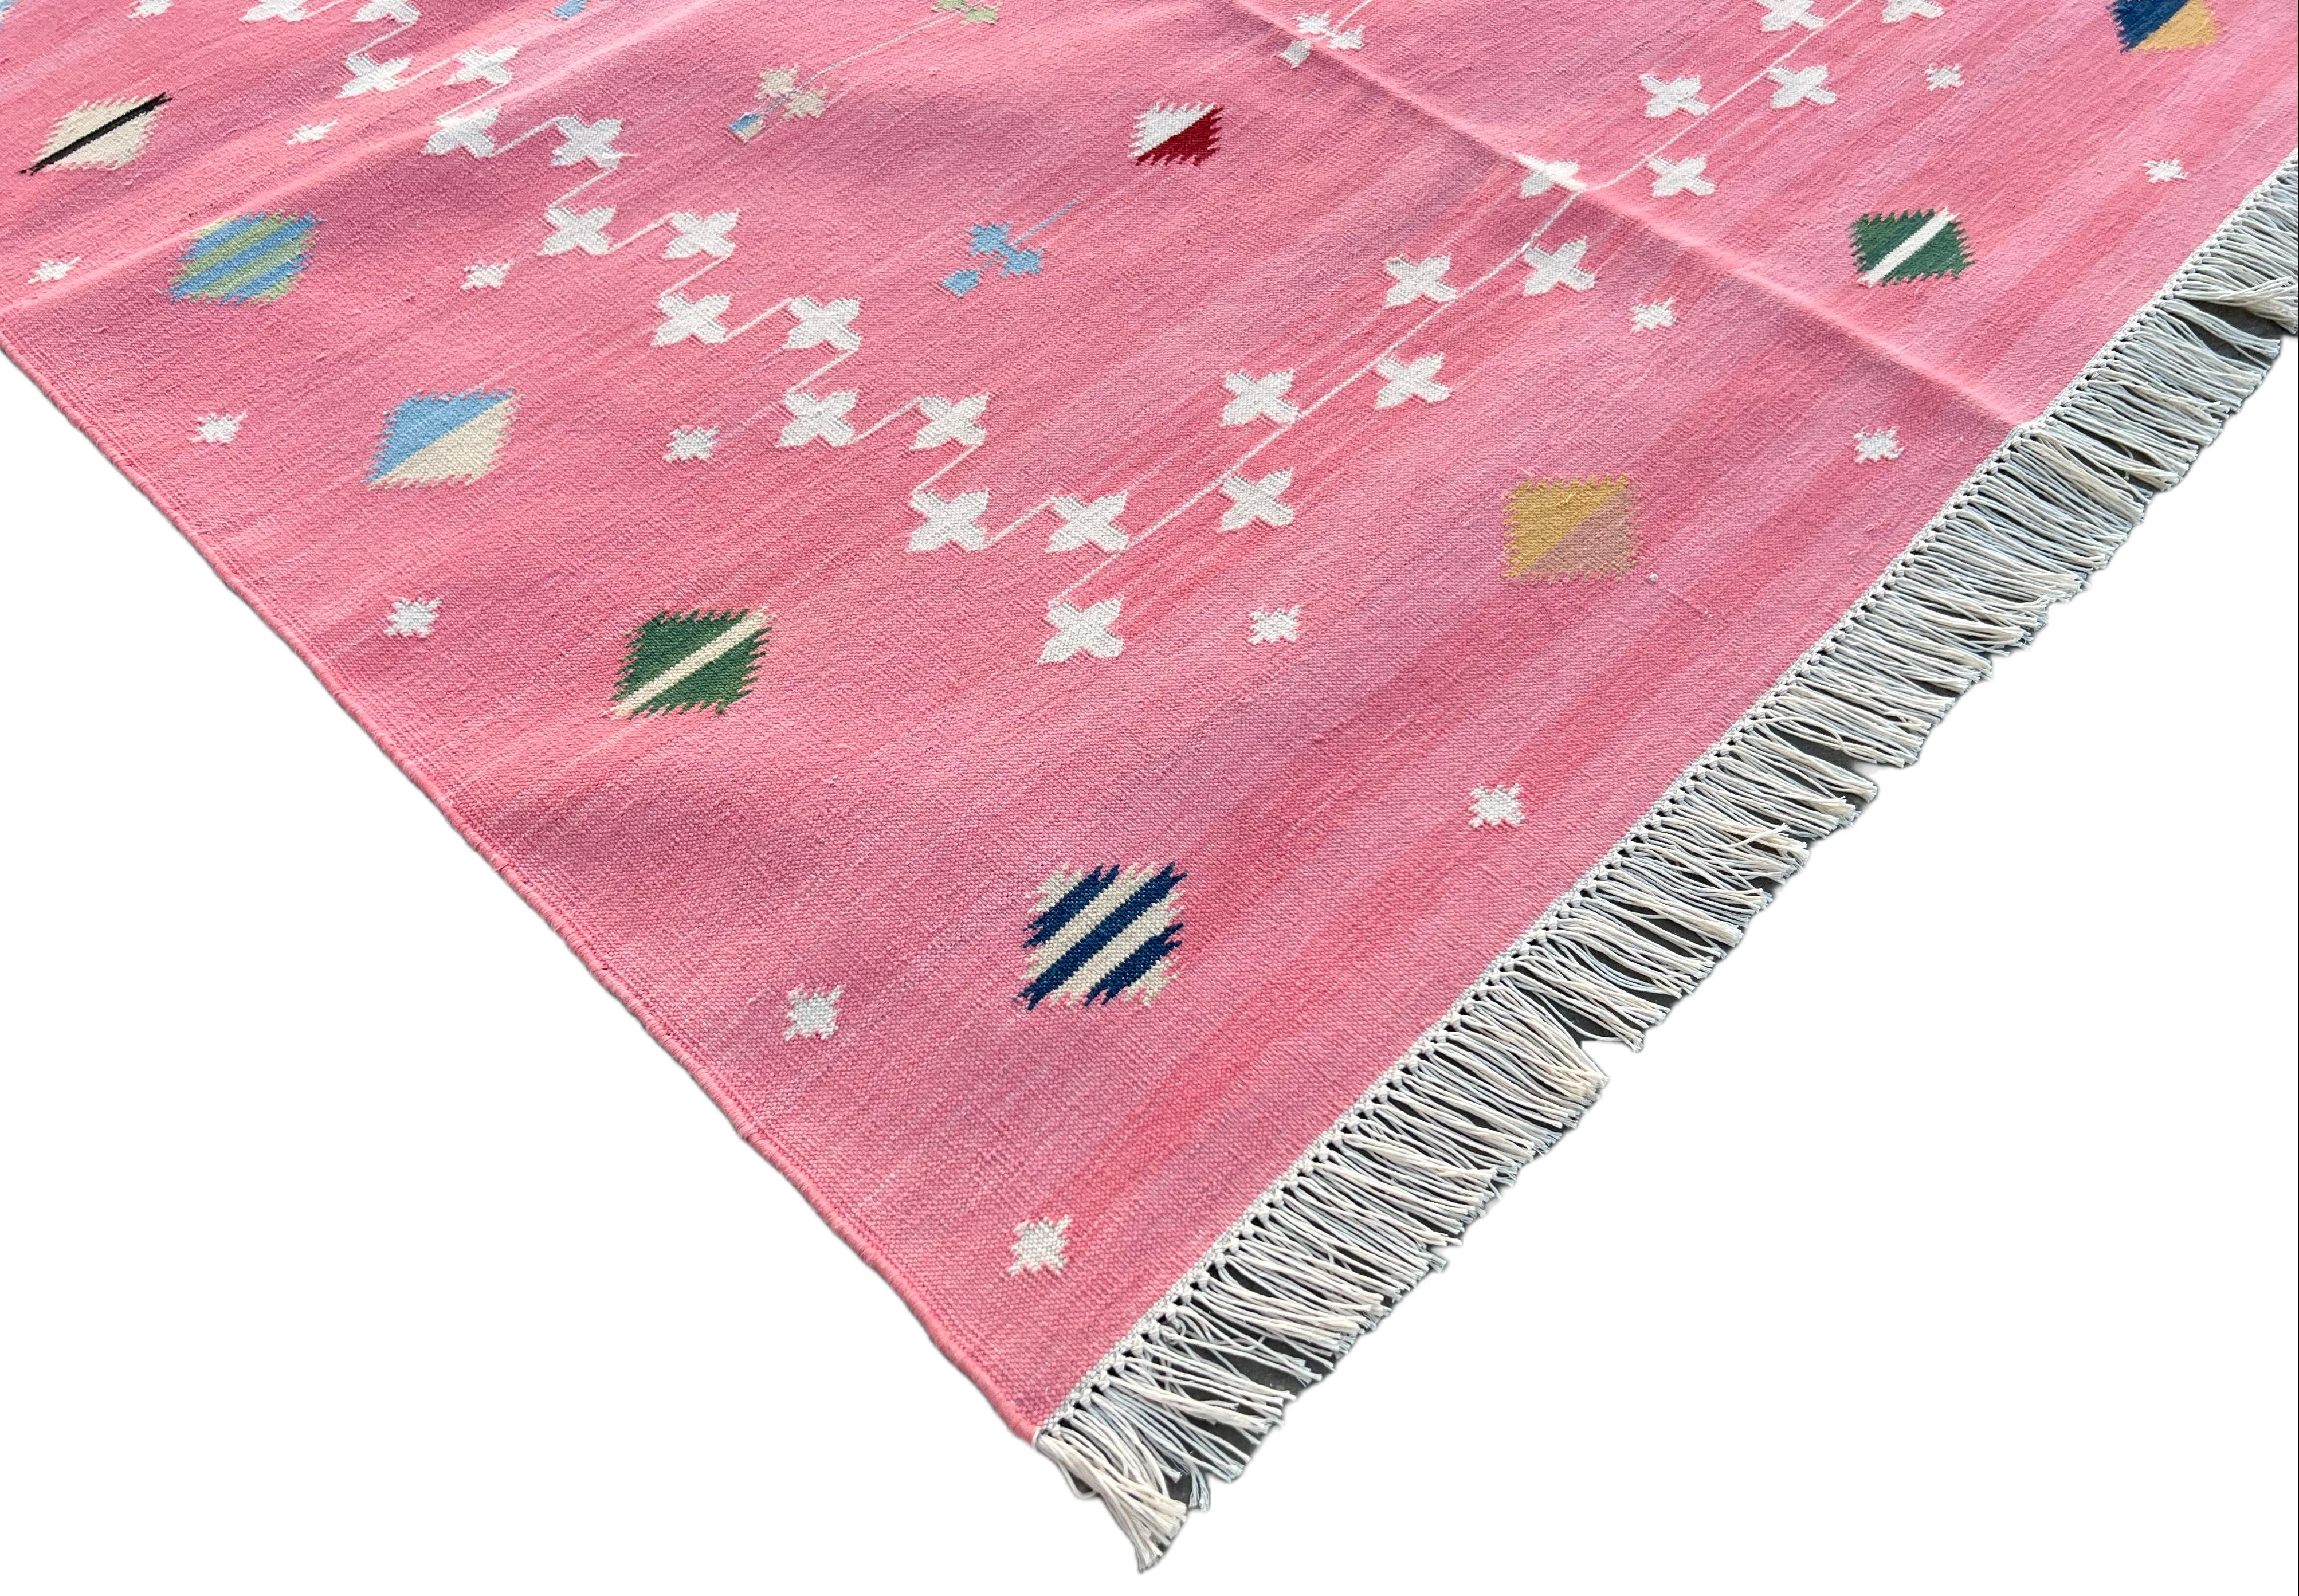 Hand-Woven Handmade Cotton Area Flat Weave Rug, 8x10 Pink And White Shooting Star Dhurrie For Sale